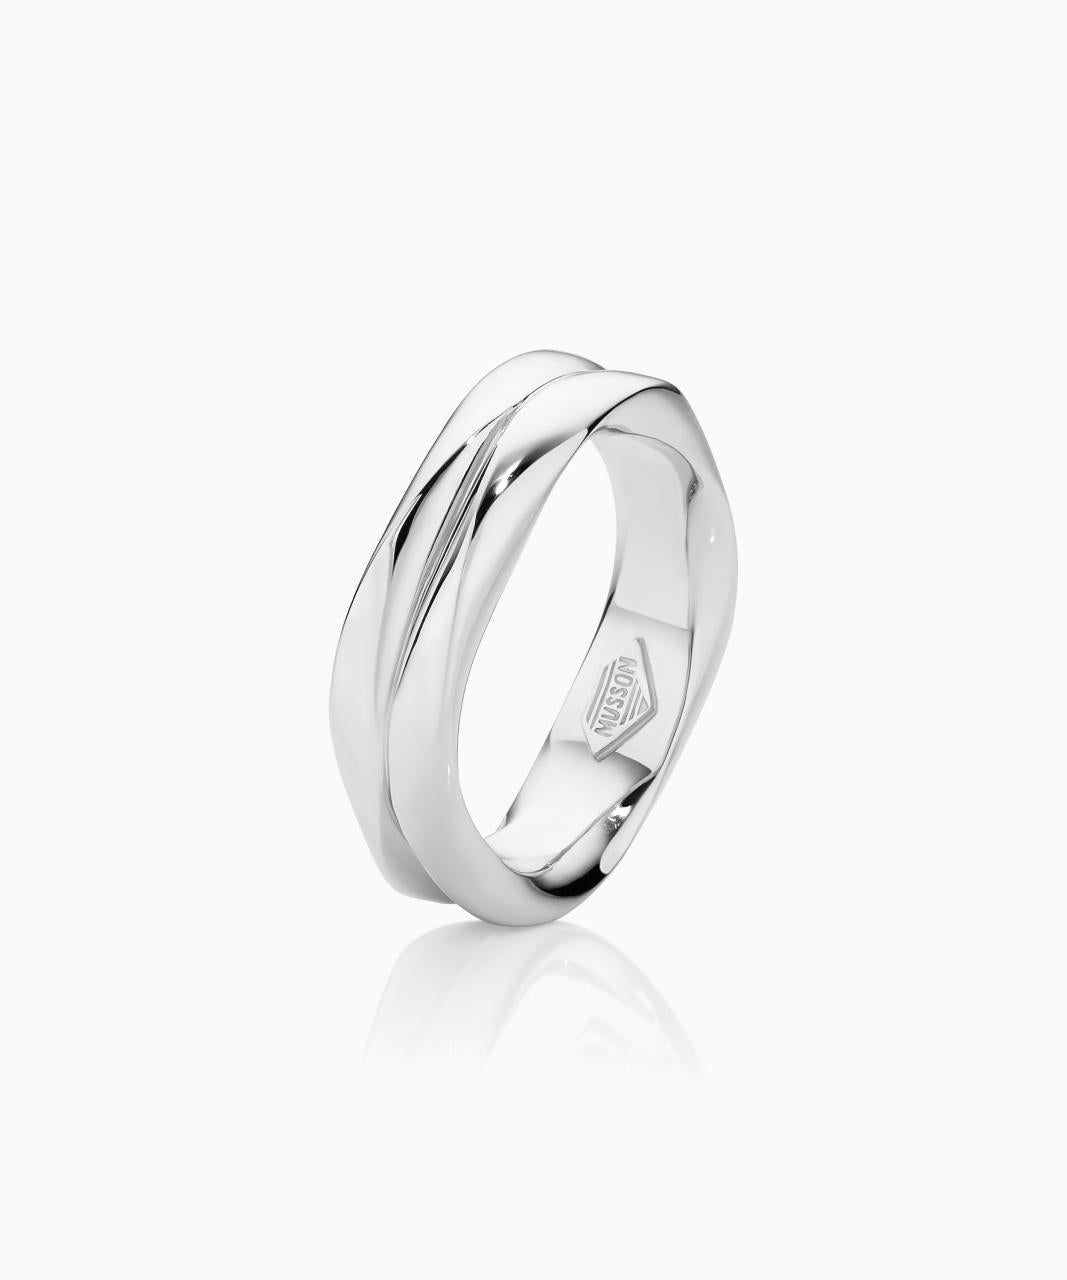 Entwined Wedding Ring - 6mm